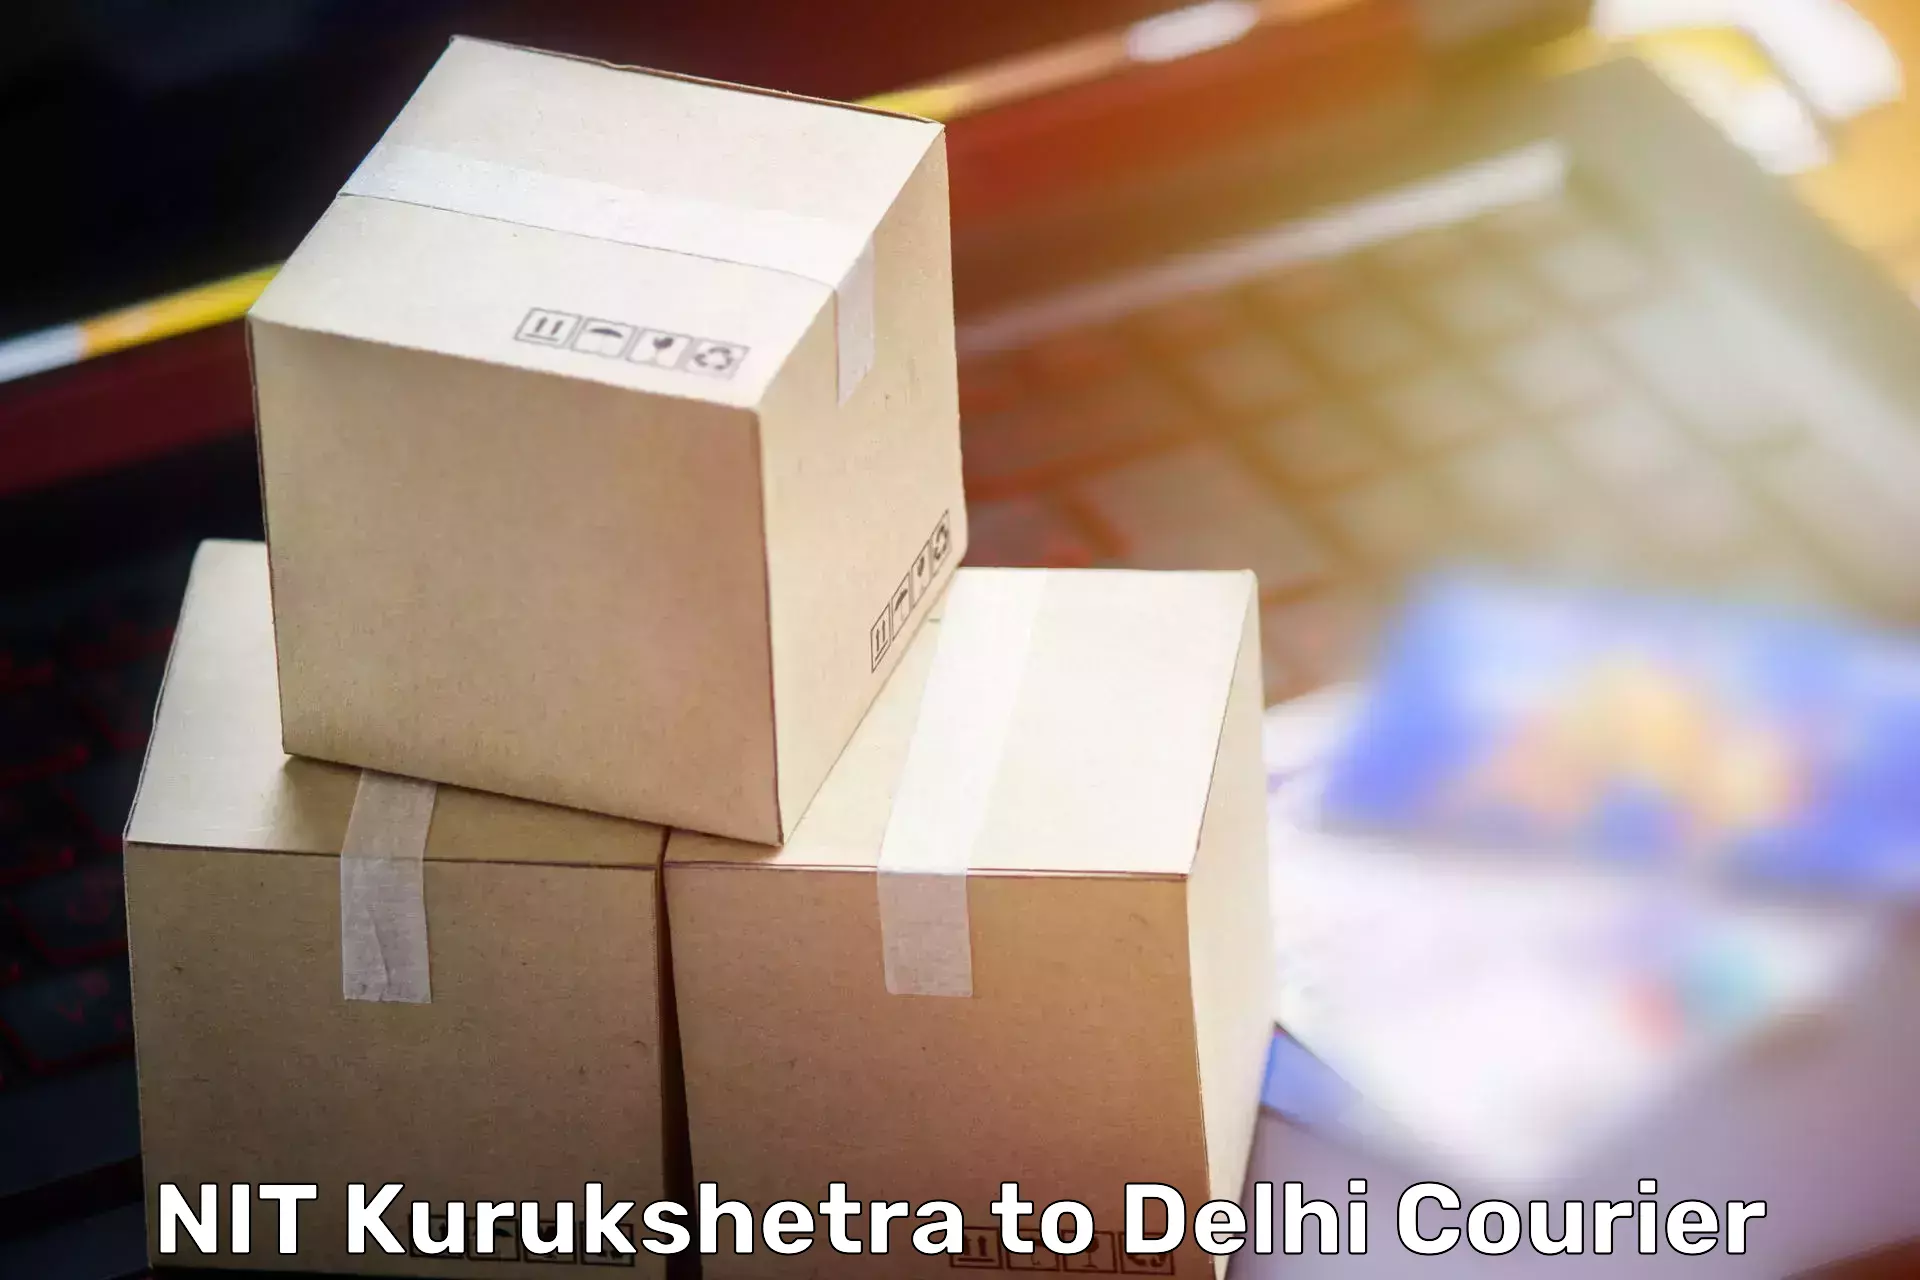 Quality relocation assistance NIT Kurukshetra to NCR